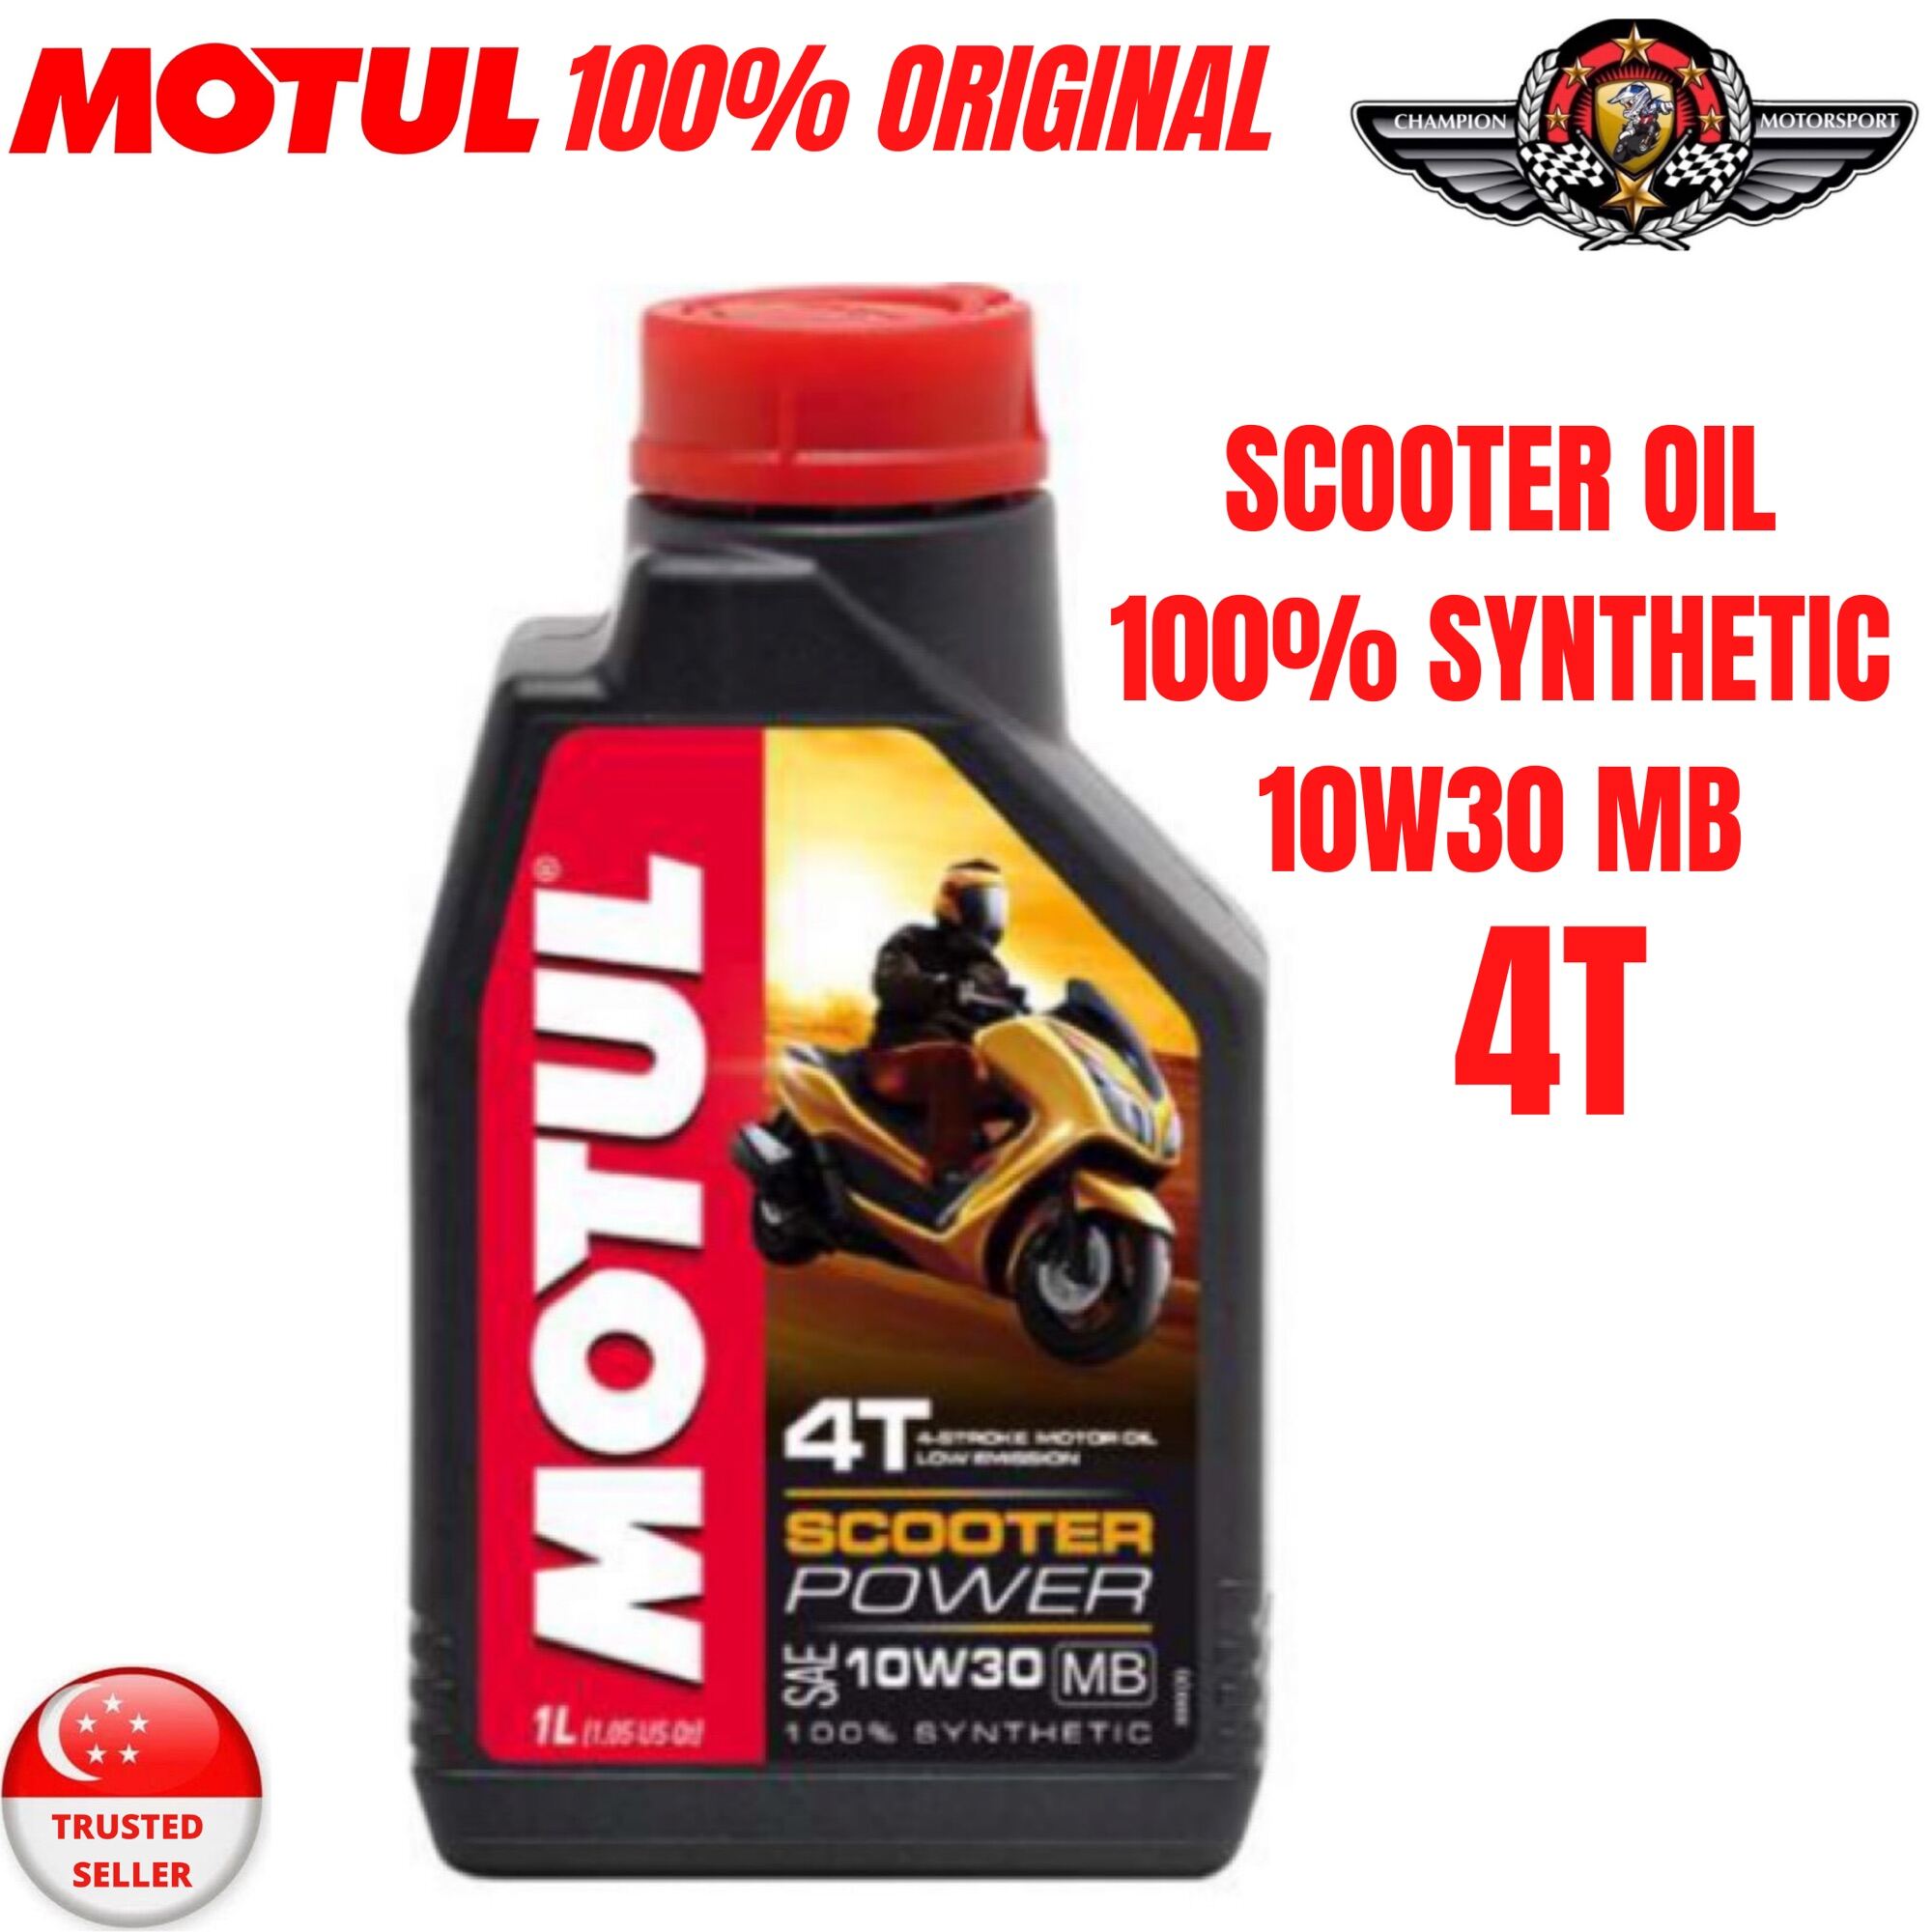 MOTUL SCOOTER POWER 4T 10W-30 MB/ 5W-40 MA FULLY SYNTHETIC ENGINE OIL 1L |  Lazada Singapore